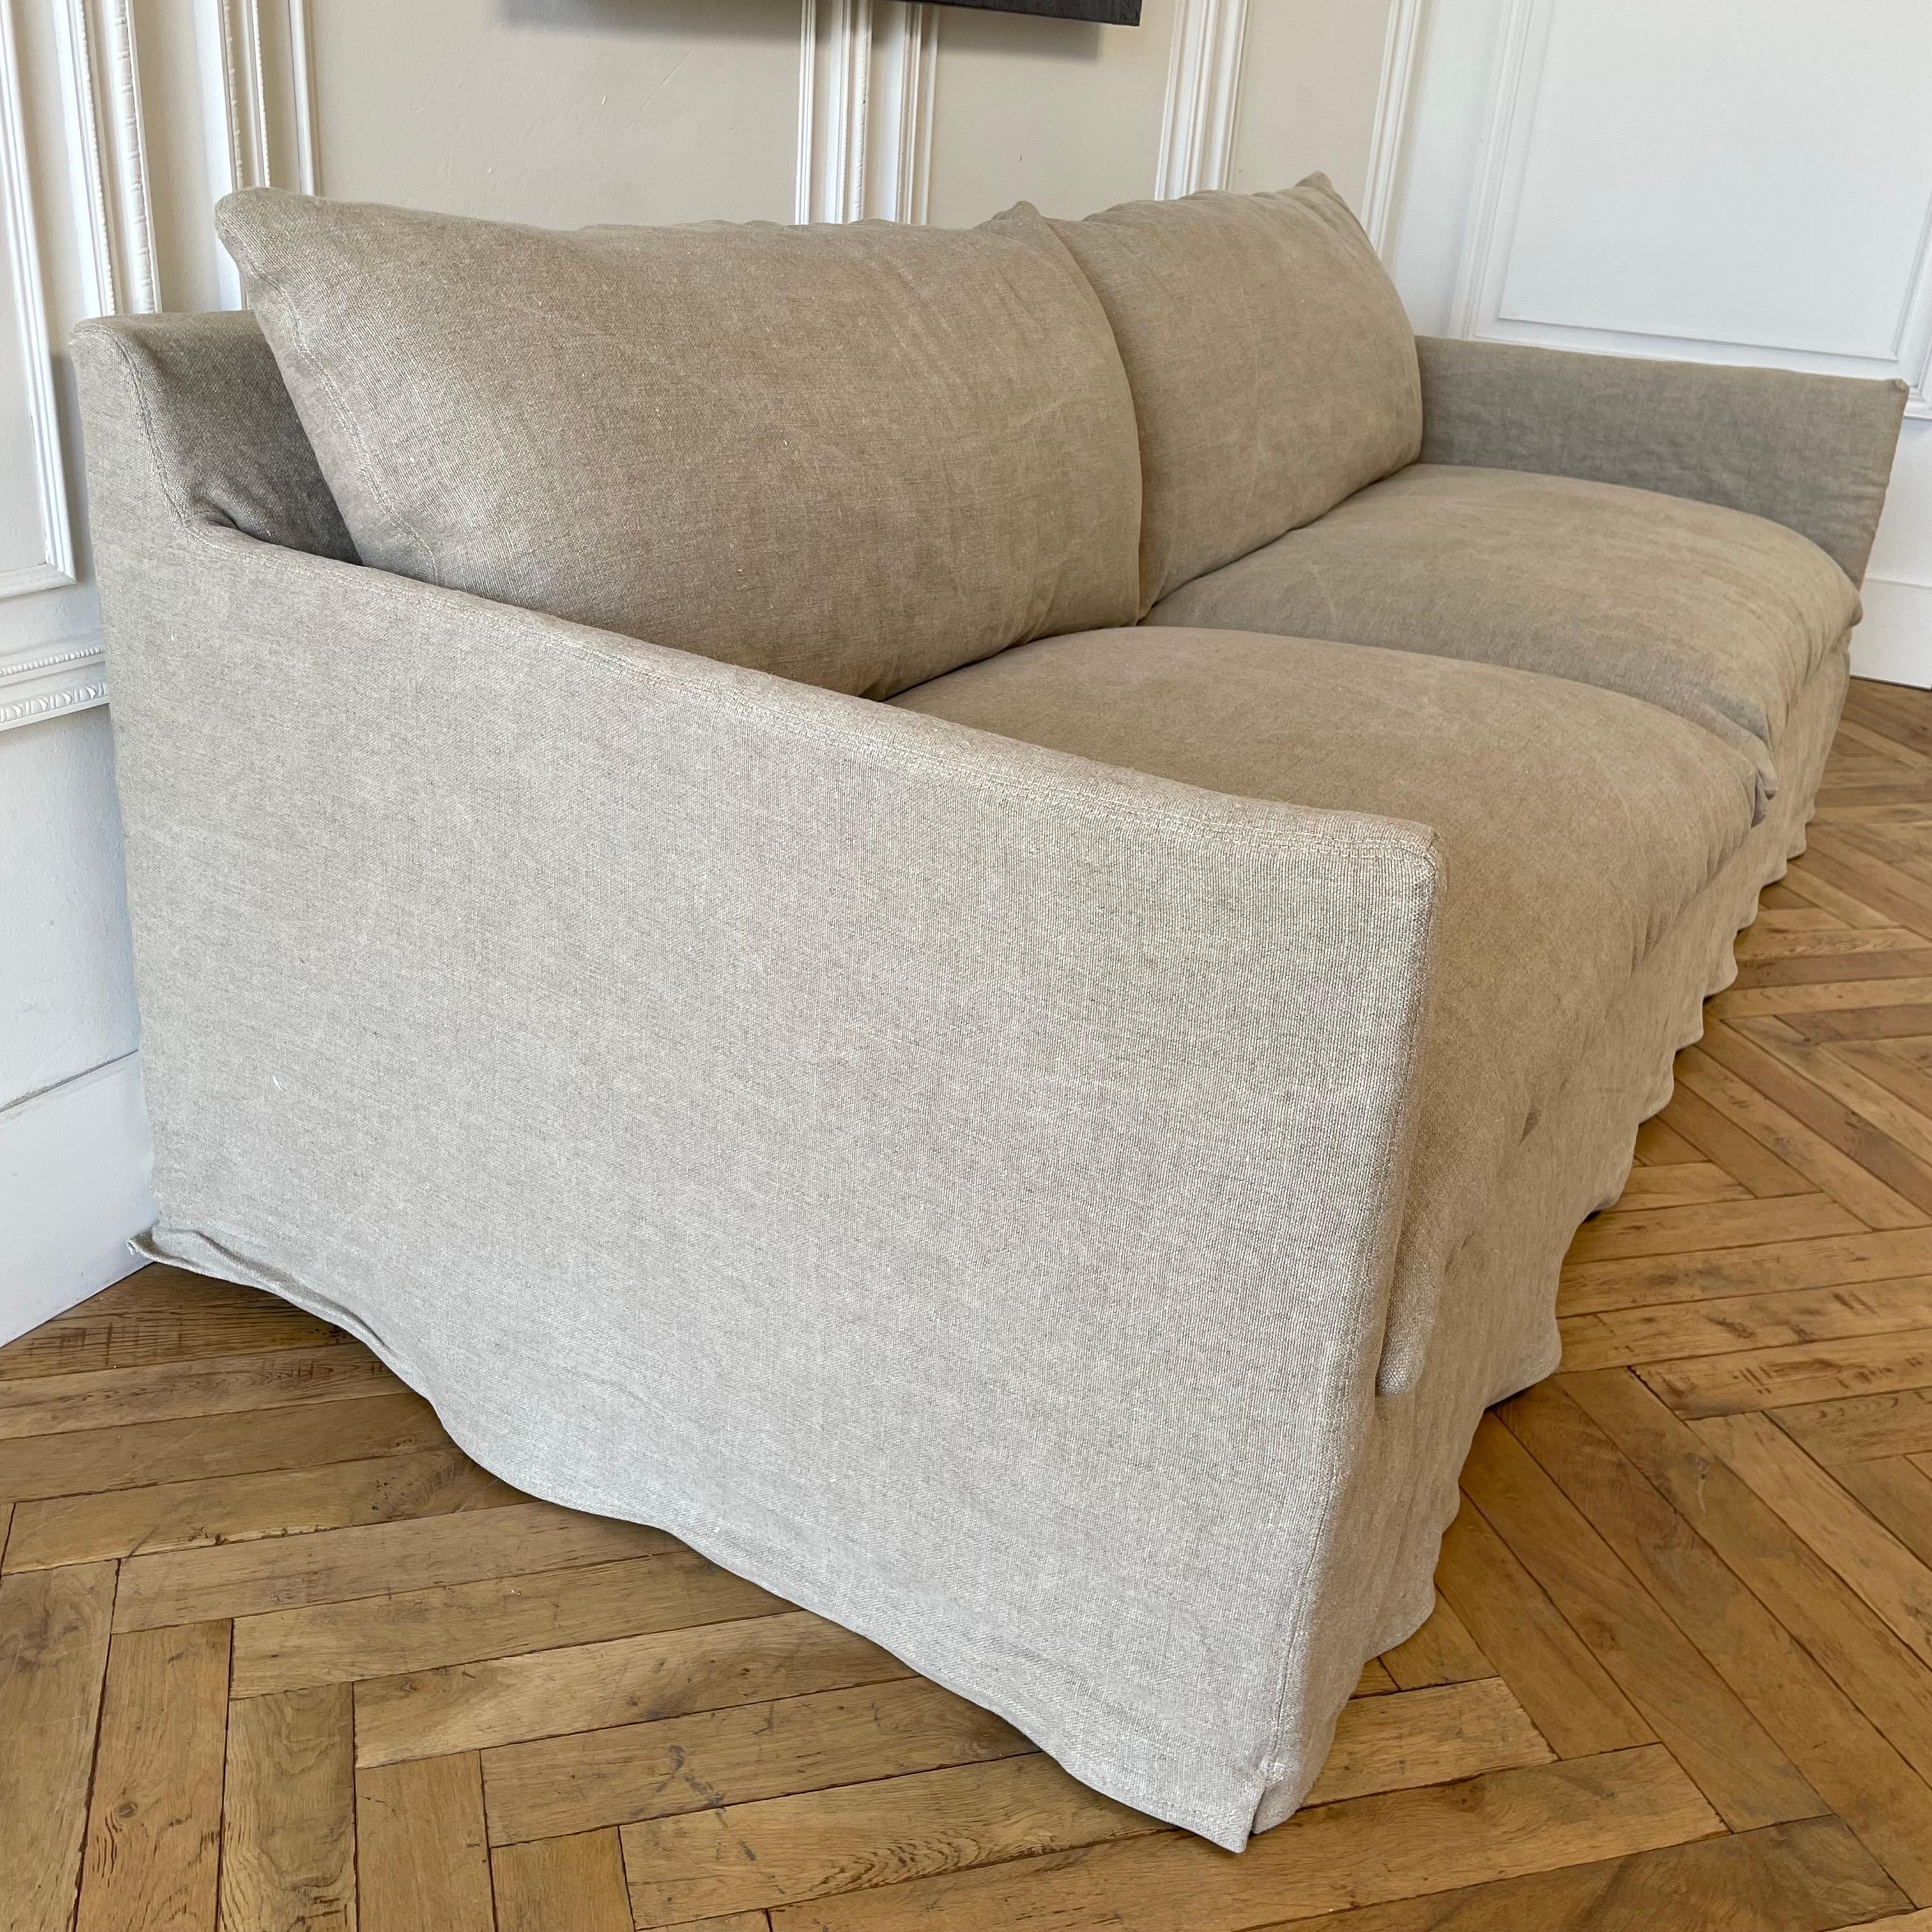 Custom Made Linen Slip Covered Sofa
Fabric: 100% Irish linen in Flax with a Stone Washed Finish
Weight 20oz. linen
Prewashed, Soft Finish
Down Style Seats and Backs, removable slip cover, dry clean recommended.
Saddle stitch cushions and backs. 